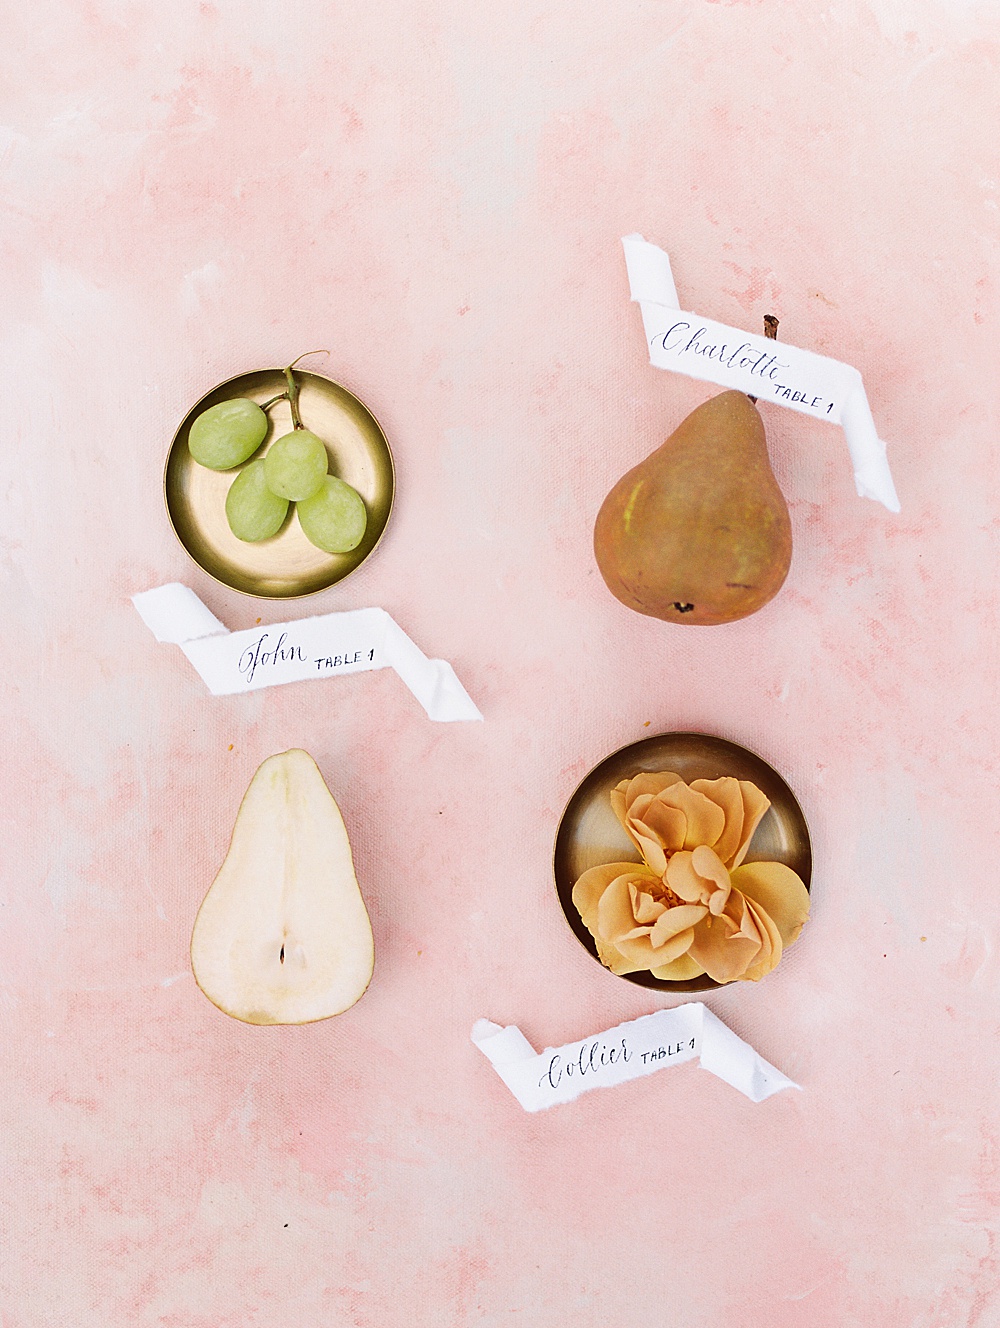 Pears and name cards wedding flatlay